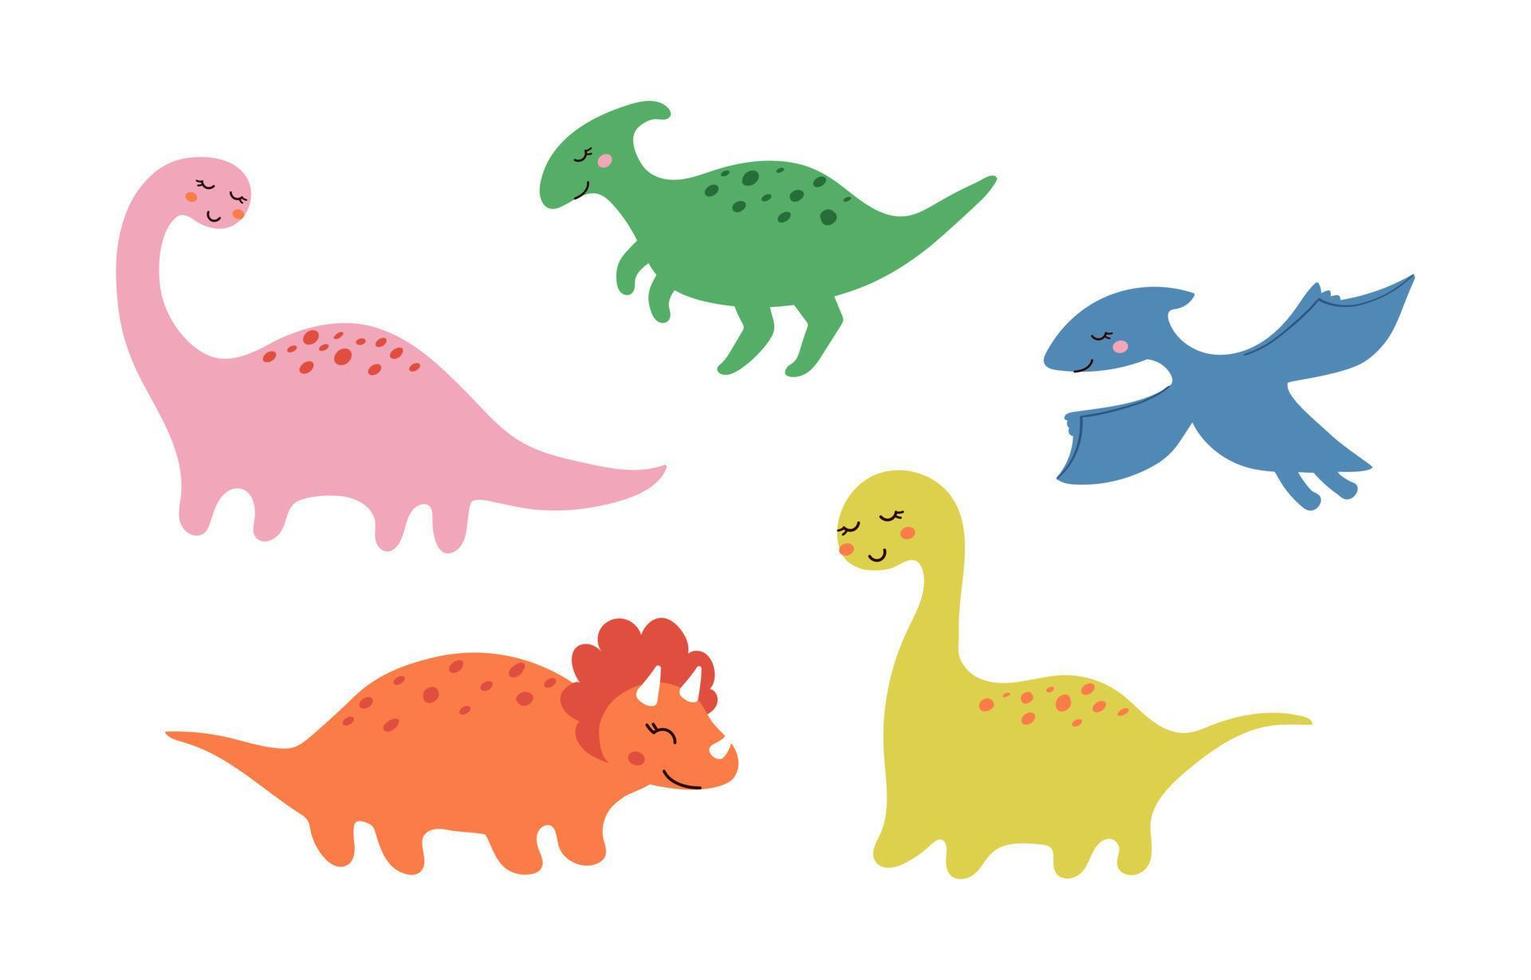 Cute little smiling dinosaurus set drawn in doodle style. Funny kids vector illustration of prehistoric animals for printing on stickers, postcards, textile, games